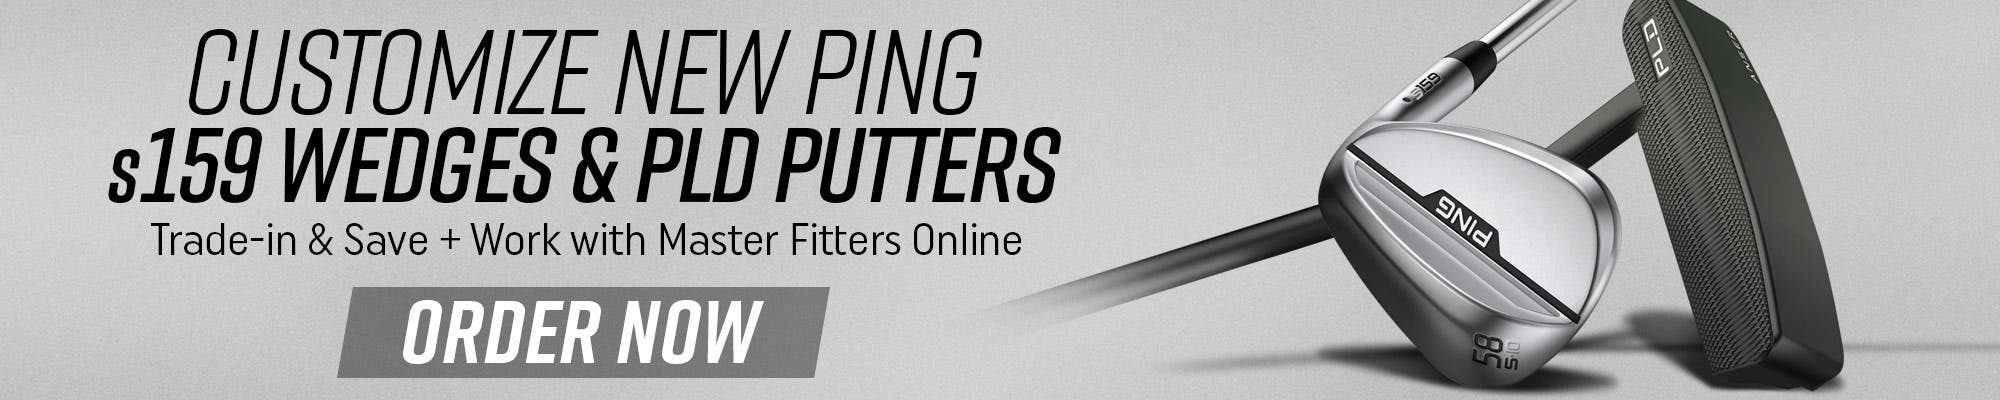 customize new ping s159 wedges + pld putters | trade in and save + work with master fitters online |order now